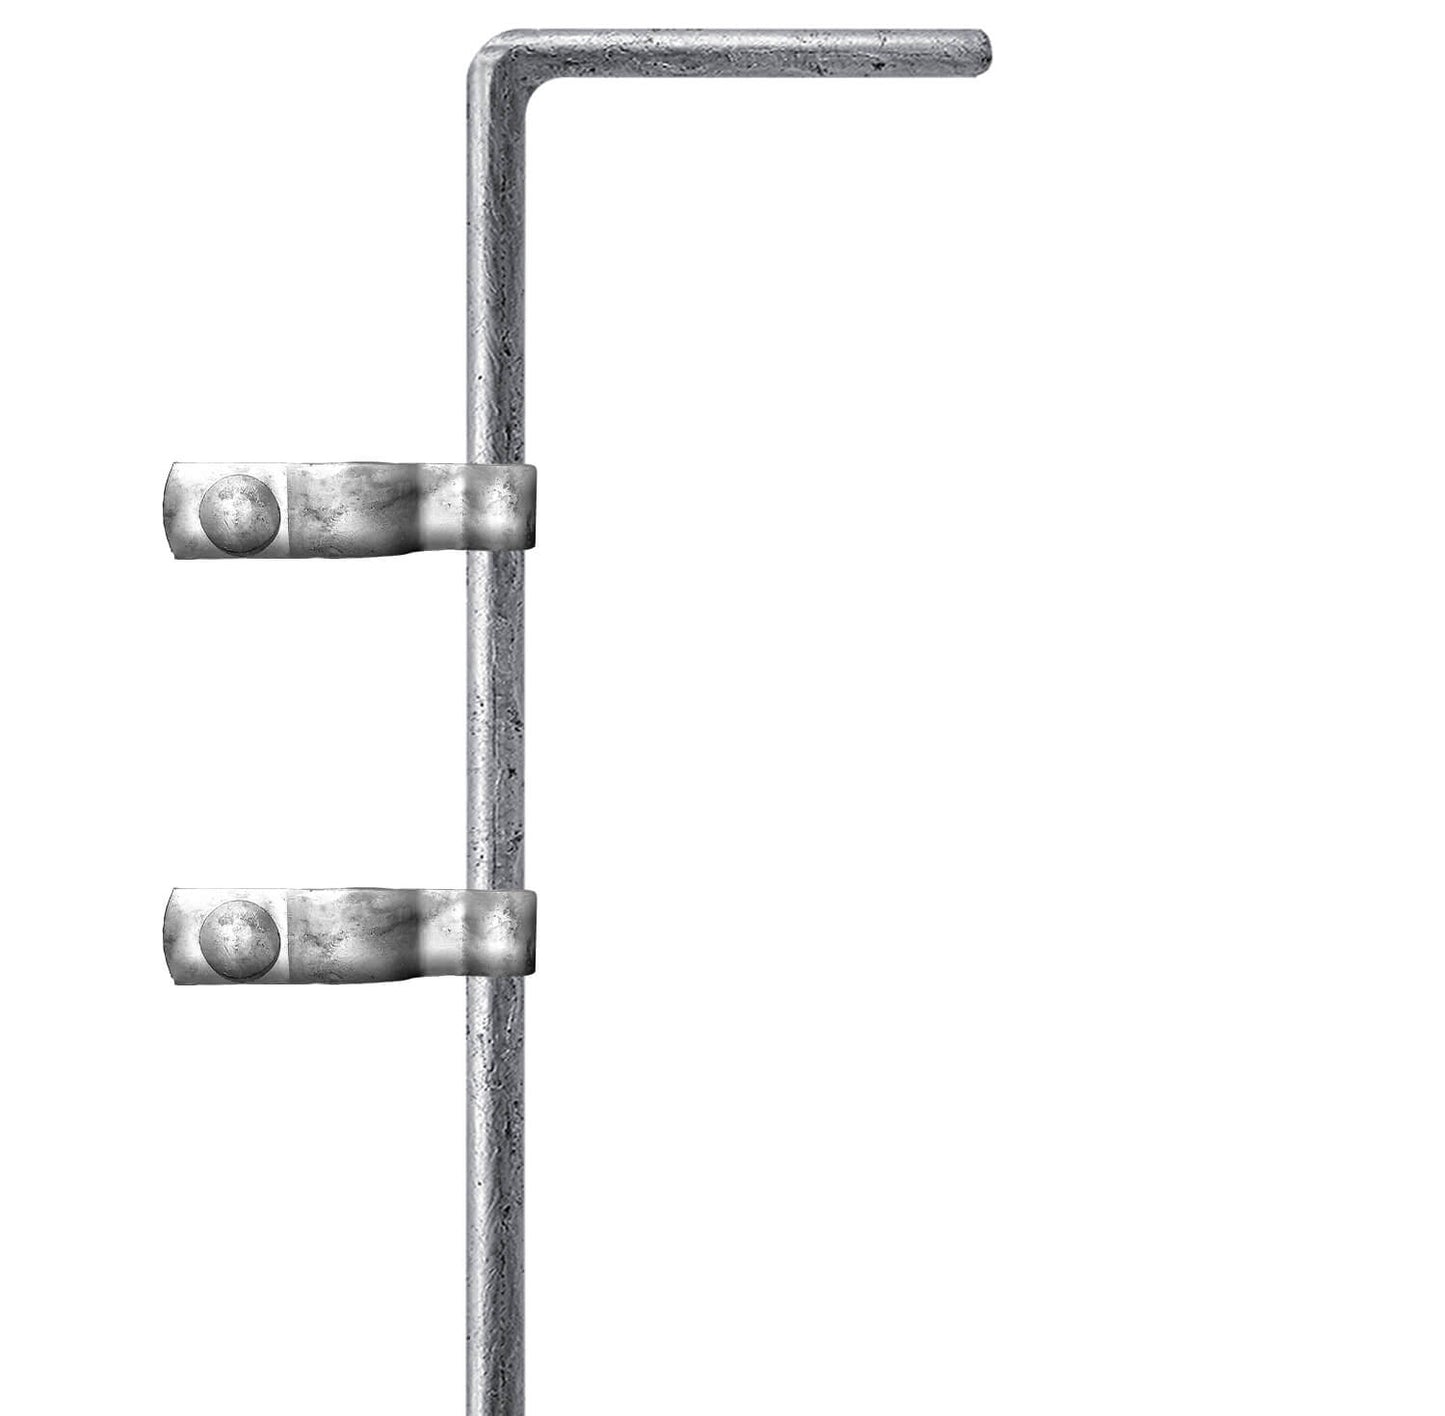 Chain Link Gate Cane Bolt (Single or Double Gate) 1-3/8" X 32"